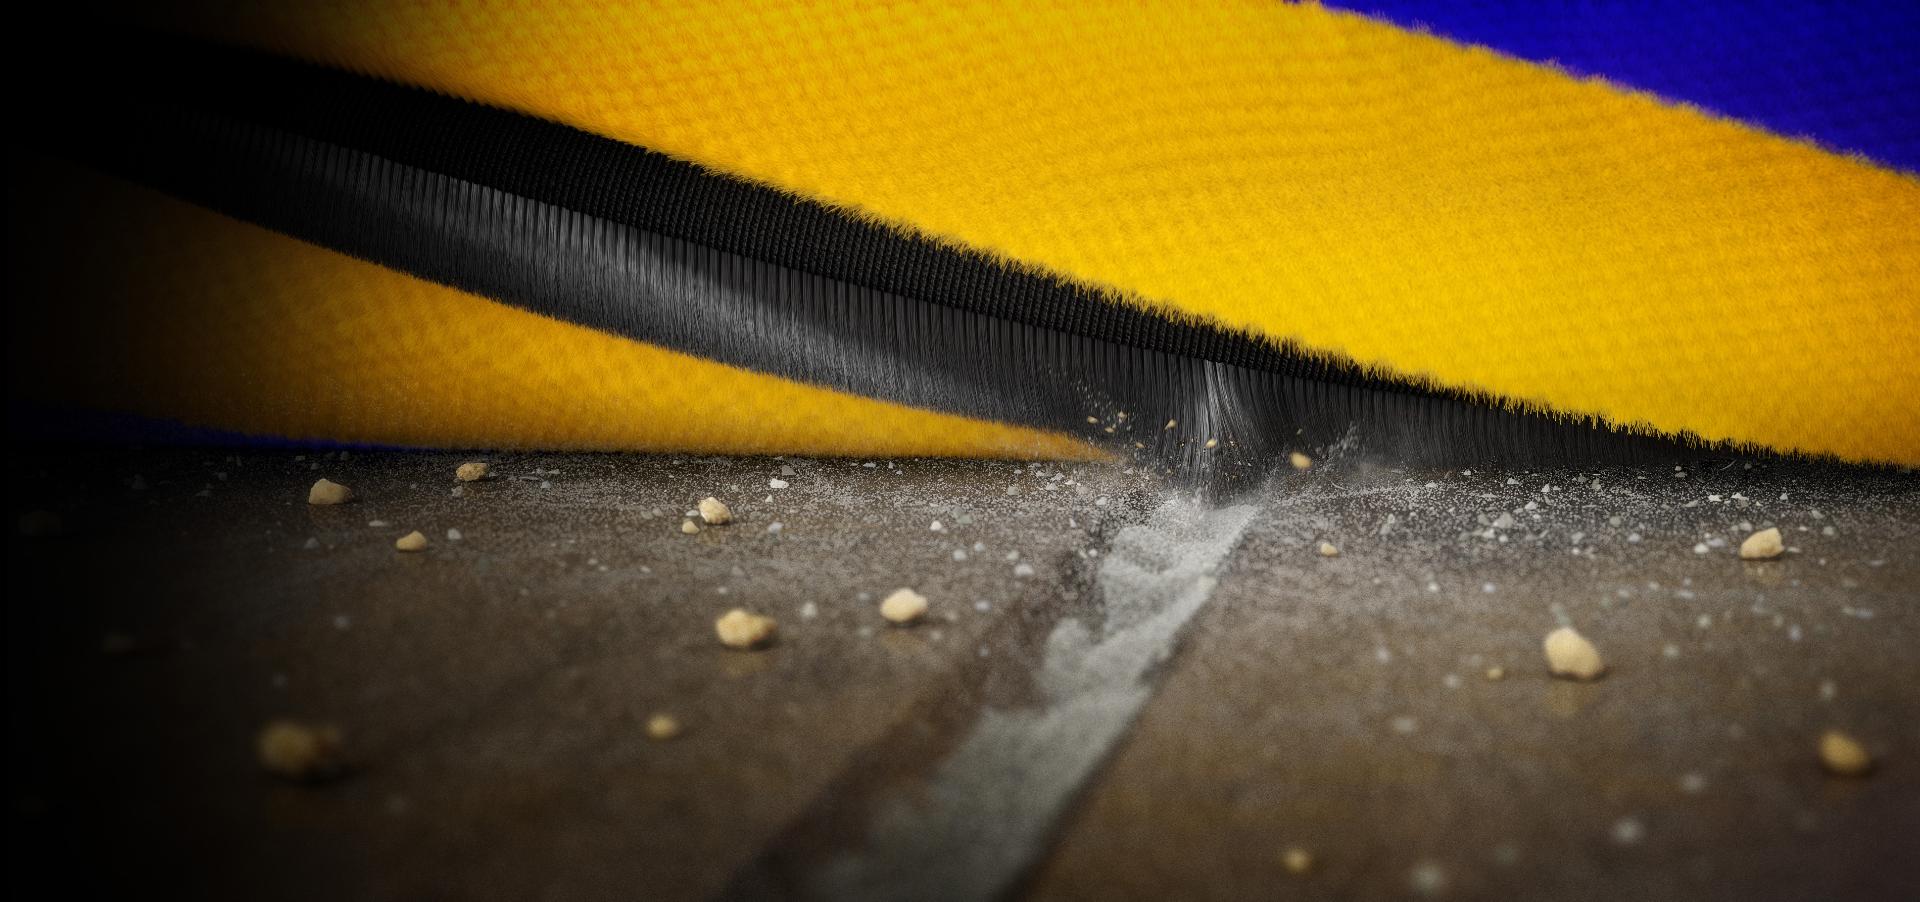 Extreme closeup of the brush bar as it rotates and the carbon fibre filament scoops up dust from a groove on a hard floor.